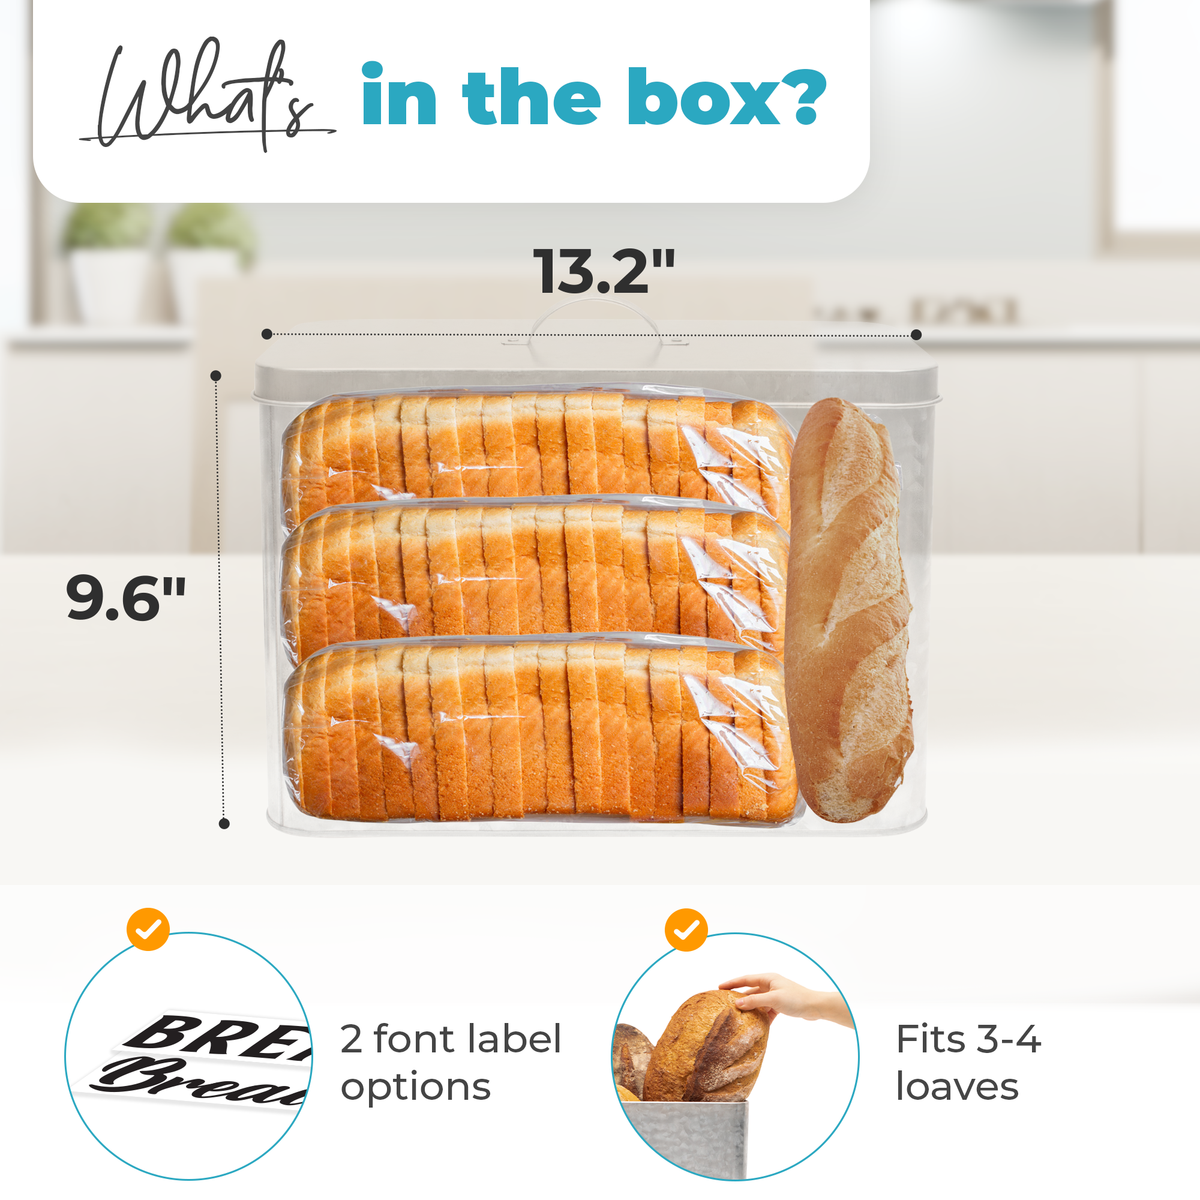 13.2 x 7.4 x 9.6 inch bread box with 2 font label options included fits 3-4 loaves